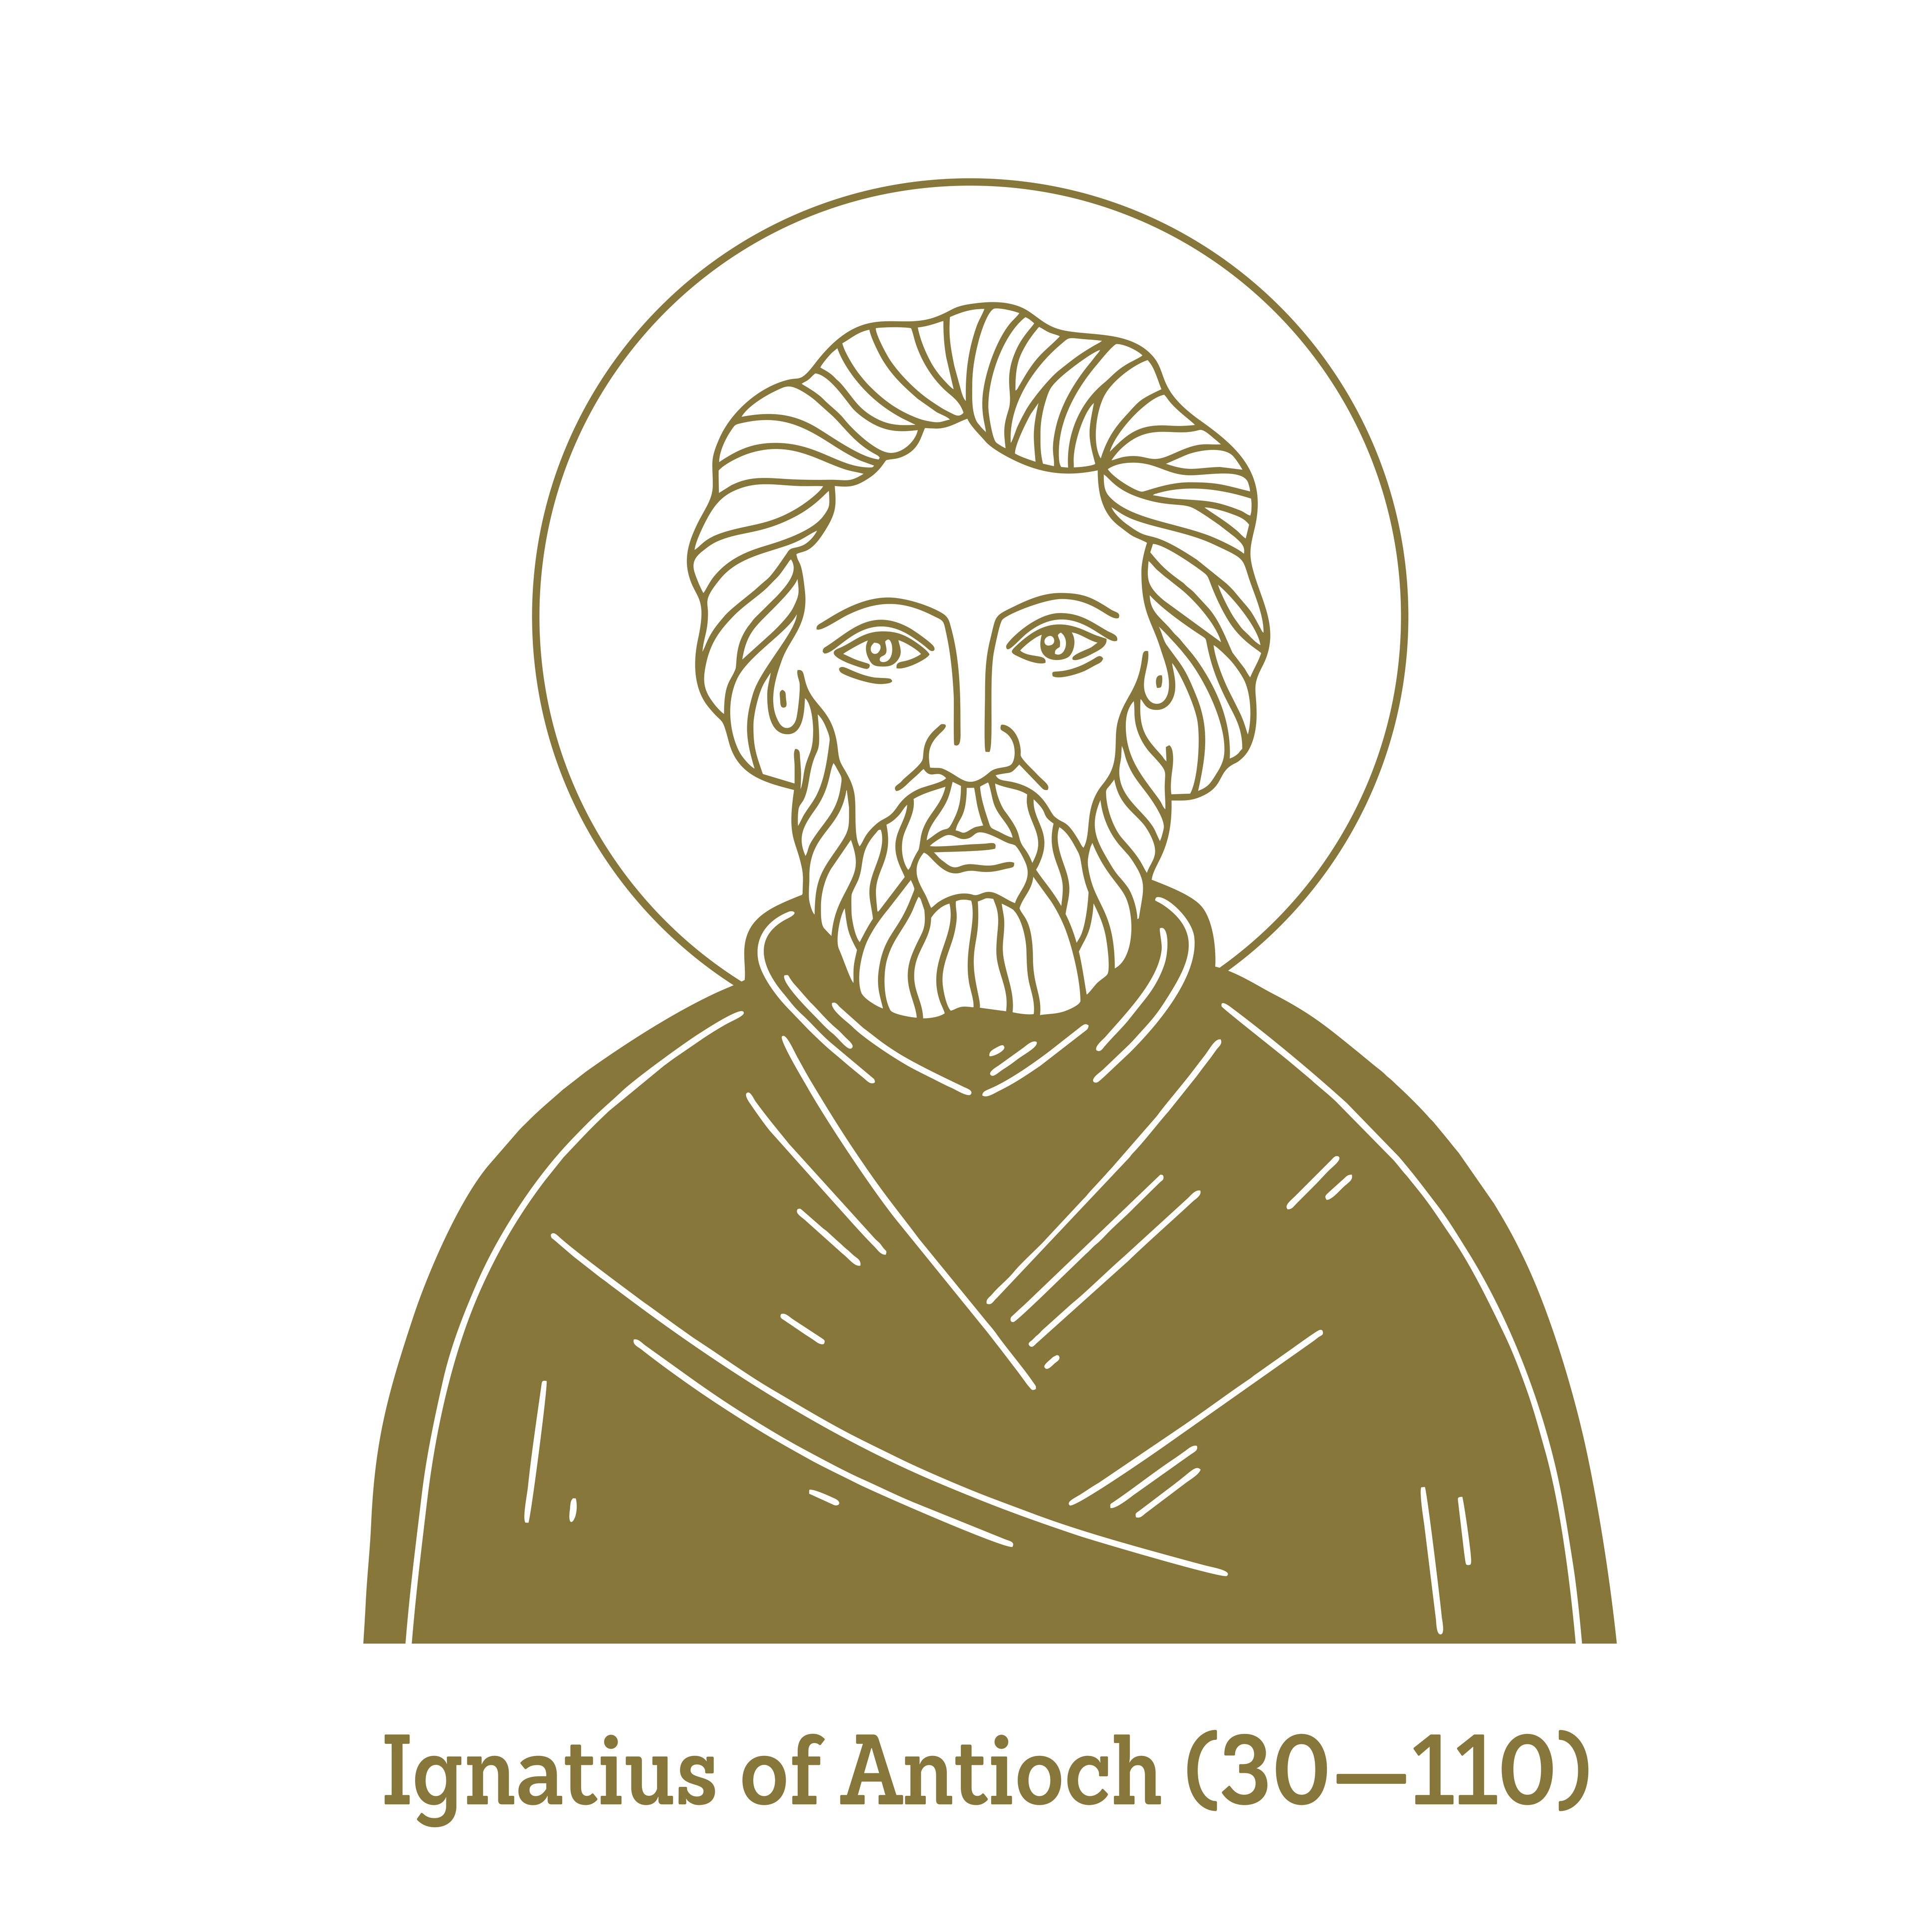 https://lastmessageofmercy.com/images/books/The%20Lord's%20Day/Ignatius.jpeg